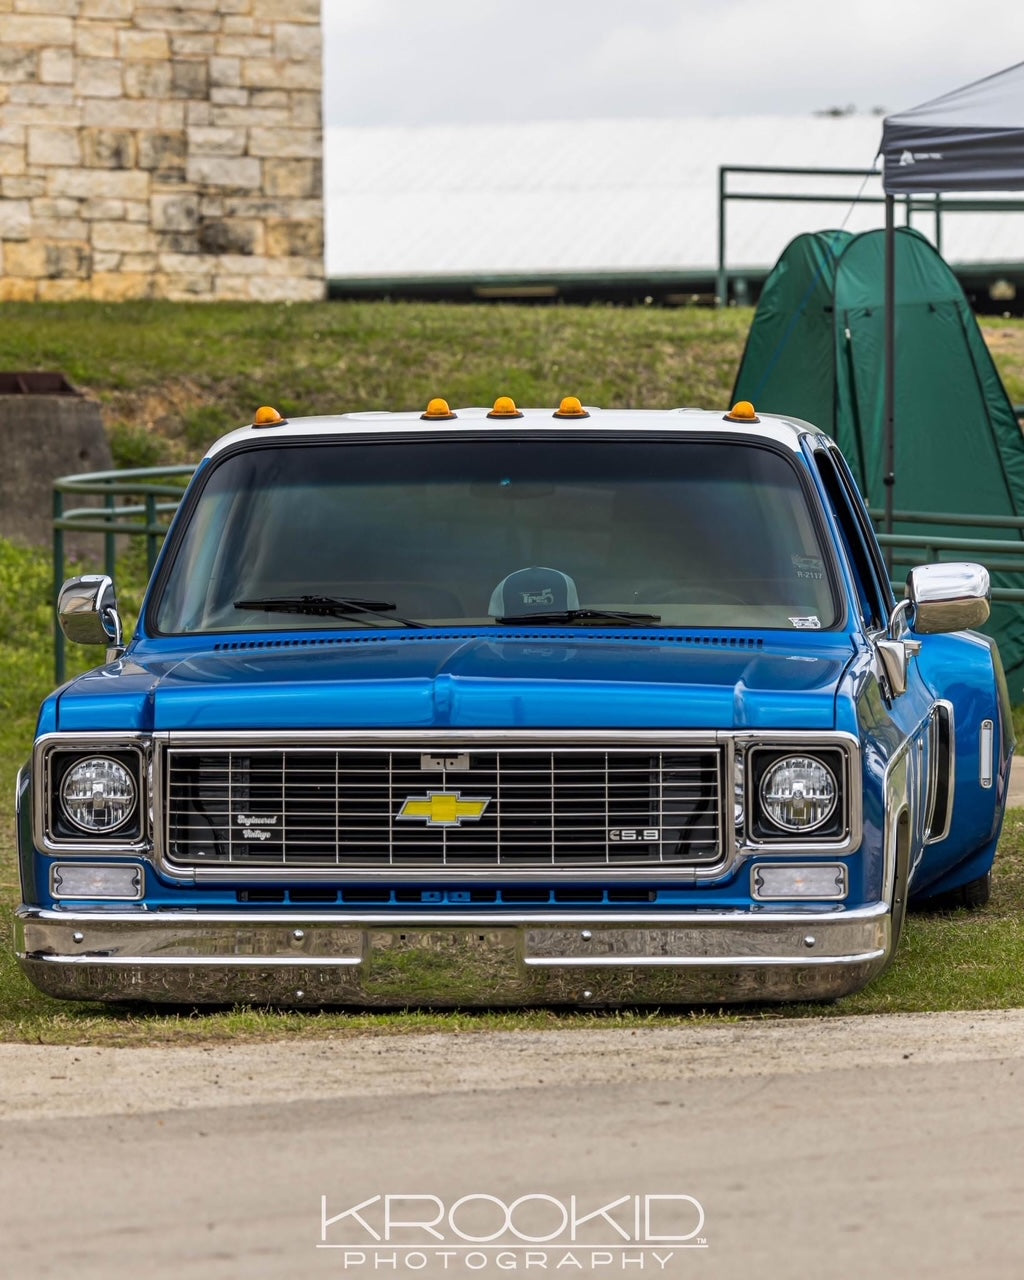 Grille AF (Aluminum Fabricated) 1973-74 Chevrolet Truck | Engineered Vintage | Custom Grilles for Classic Trucks